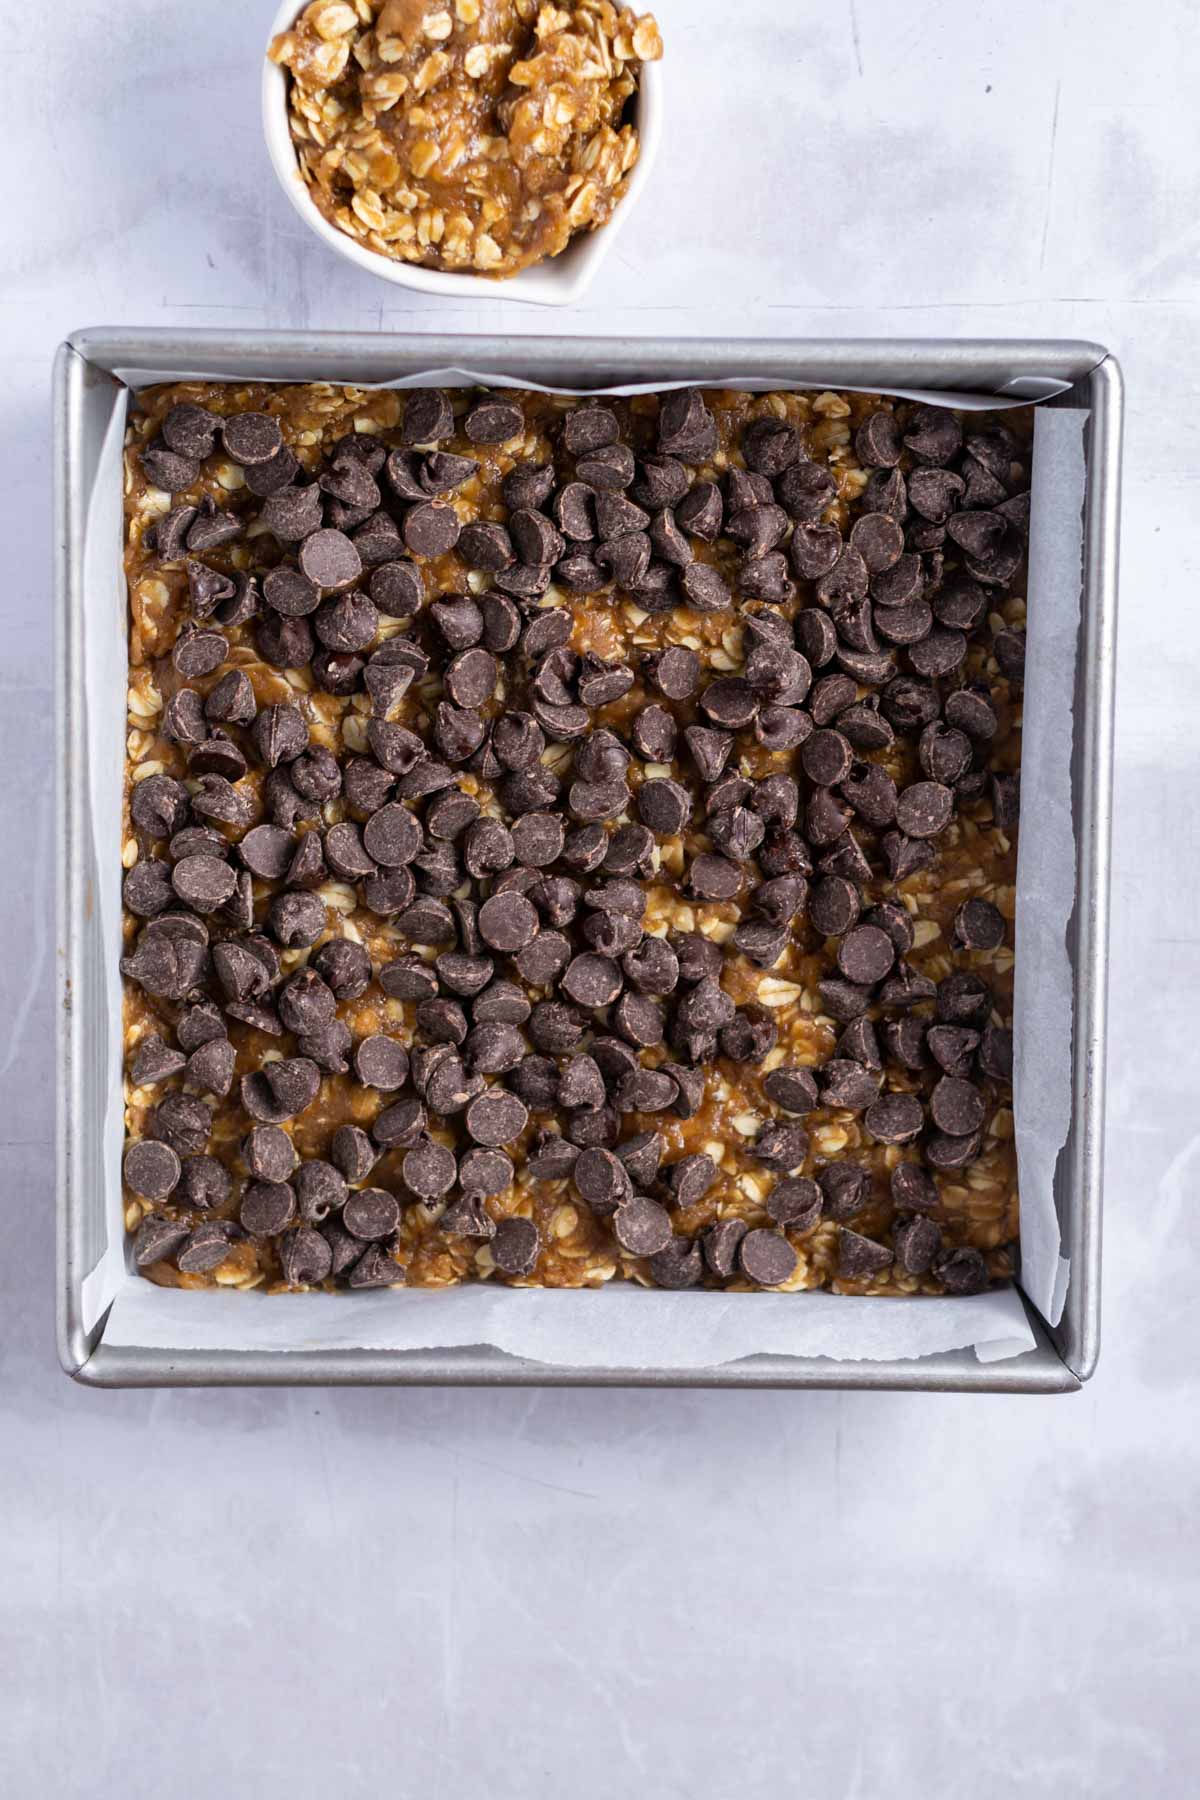 chocolate chips spread over oatmeal base layer in a baking square